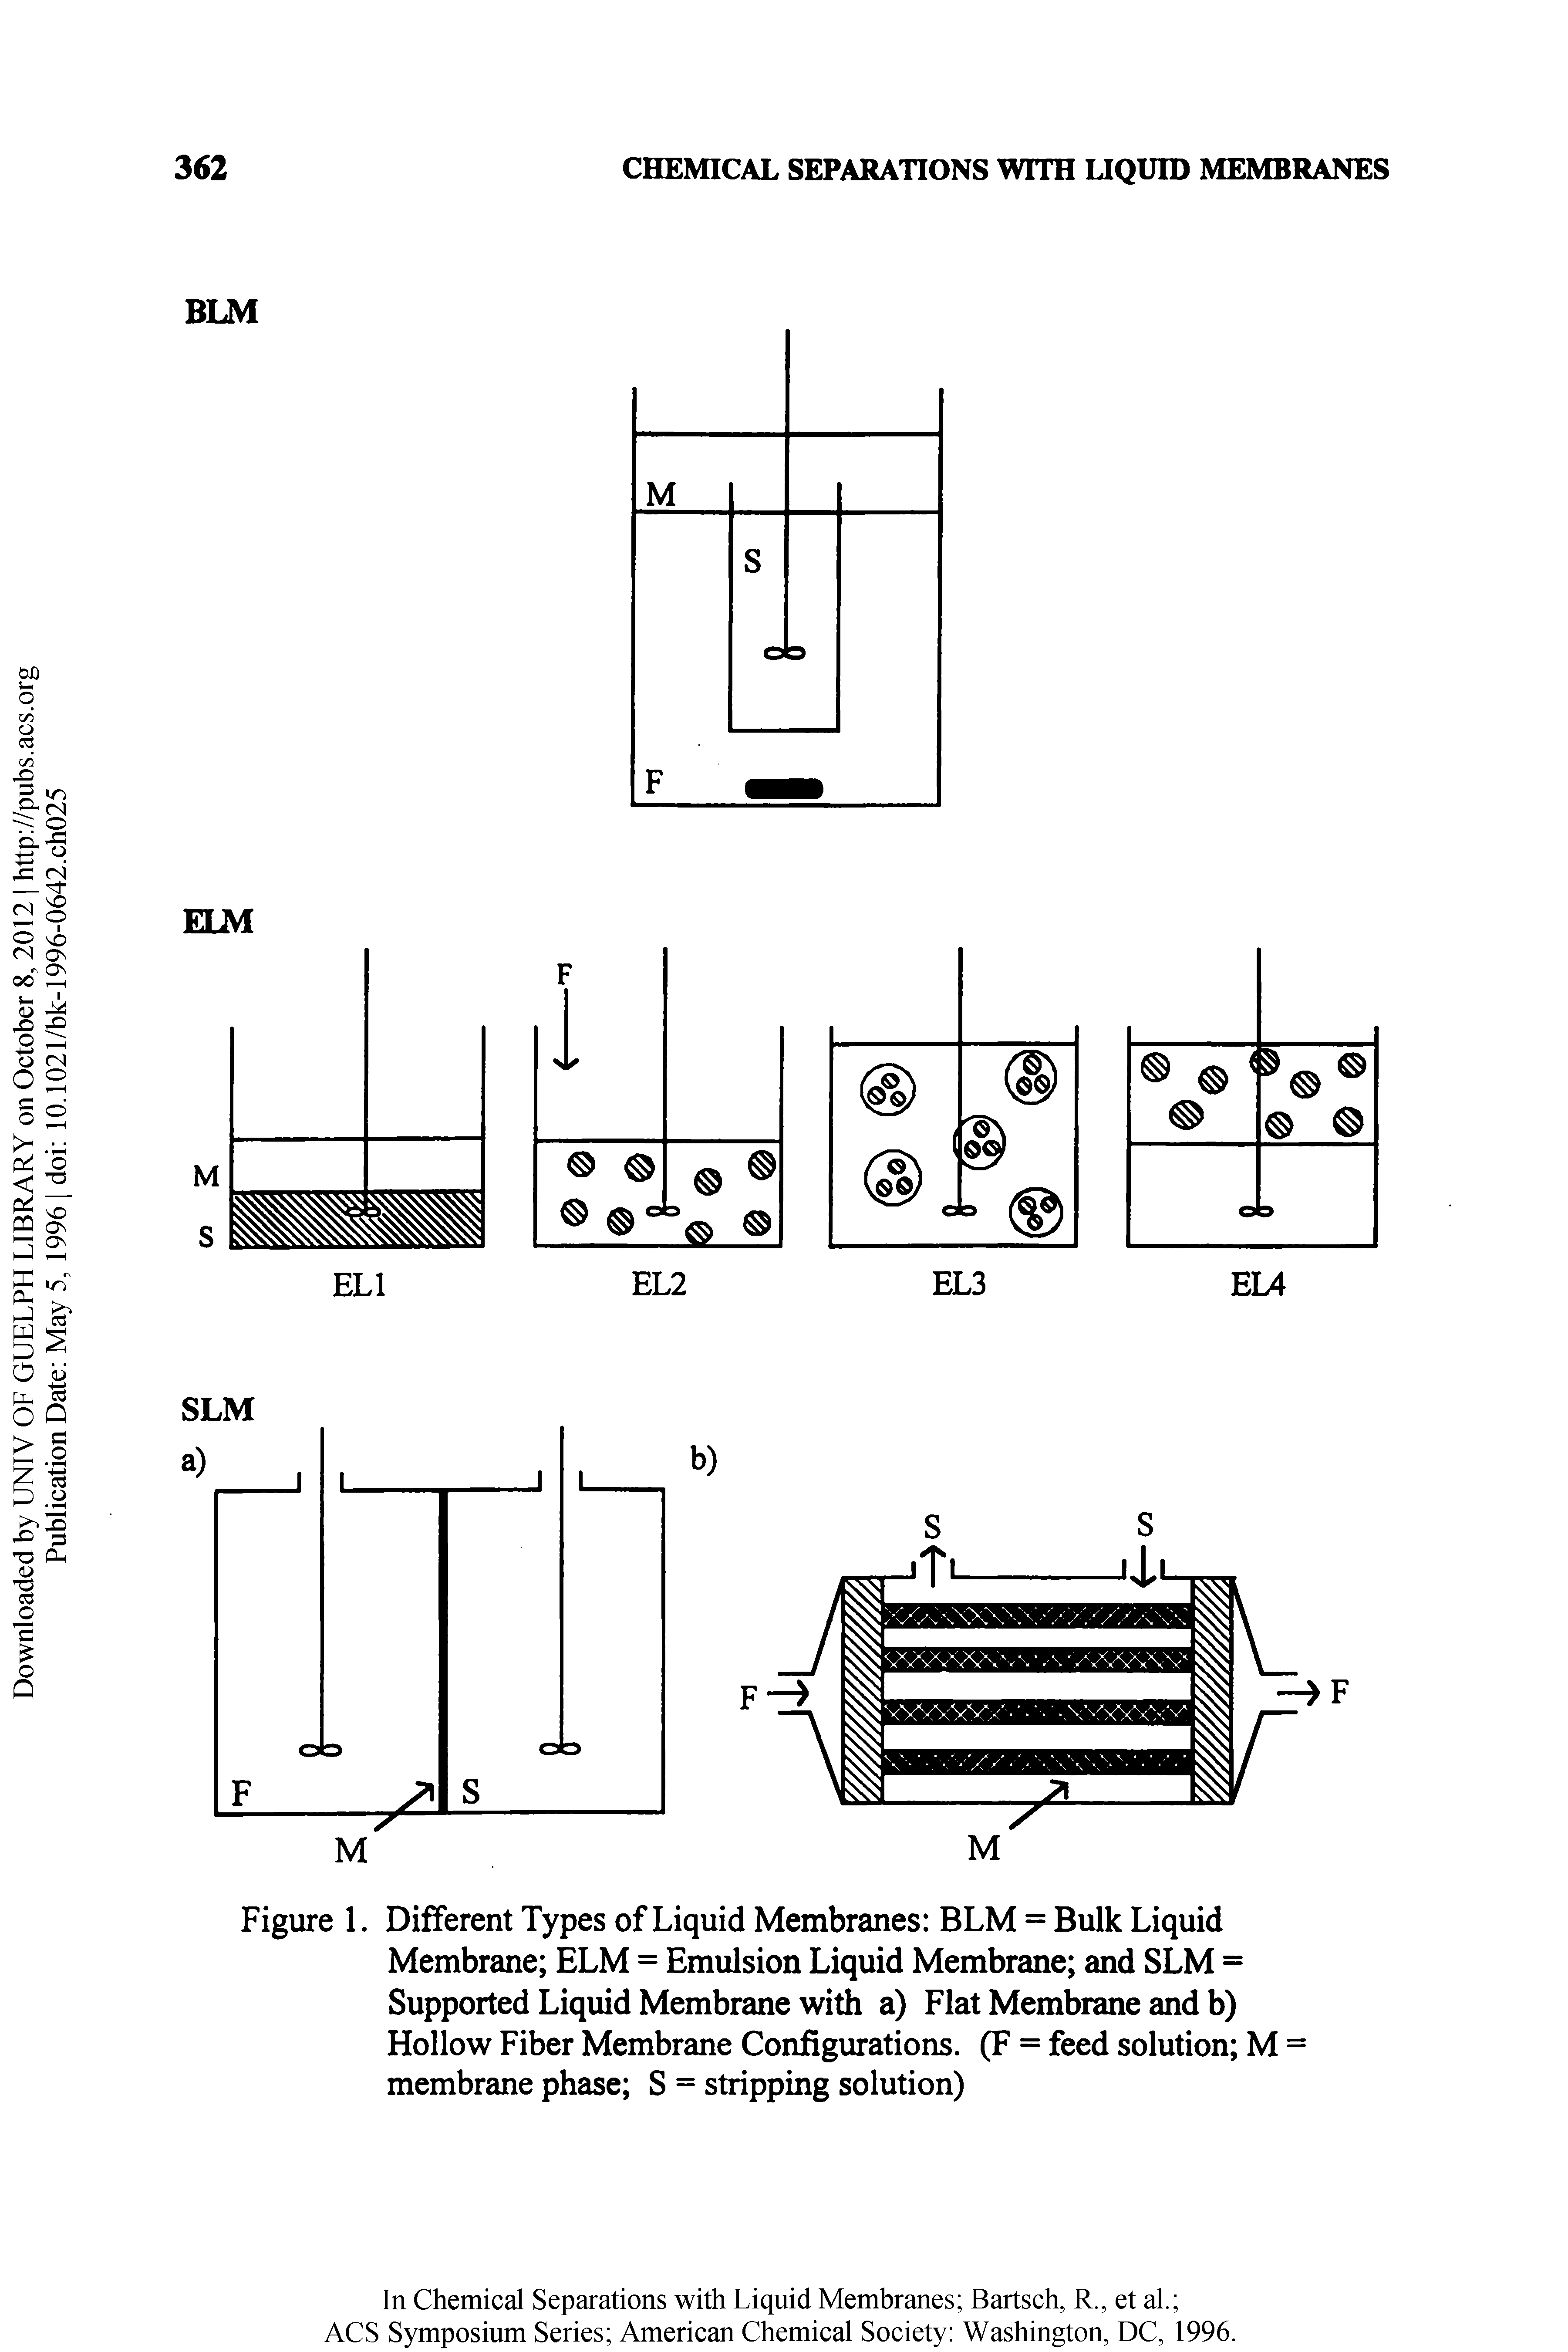 Figure 1. Different Types of Liquid Membranes BLM = Bulk Liquid Membrane ELM = Emulsion Liquid Membrane and SLM = Supported Liquid Membrane with a) Flat Membrane and b) Hollow Fiber Membrane Configurations. (F = feed solution M = membrane phase S = stripping solution)...